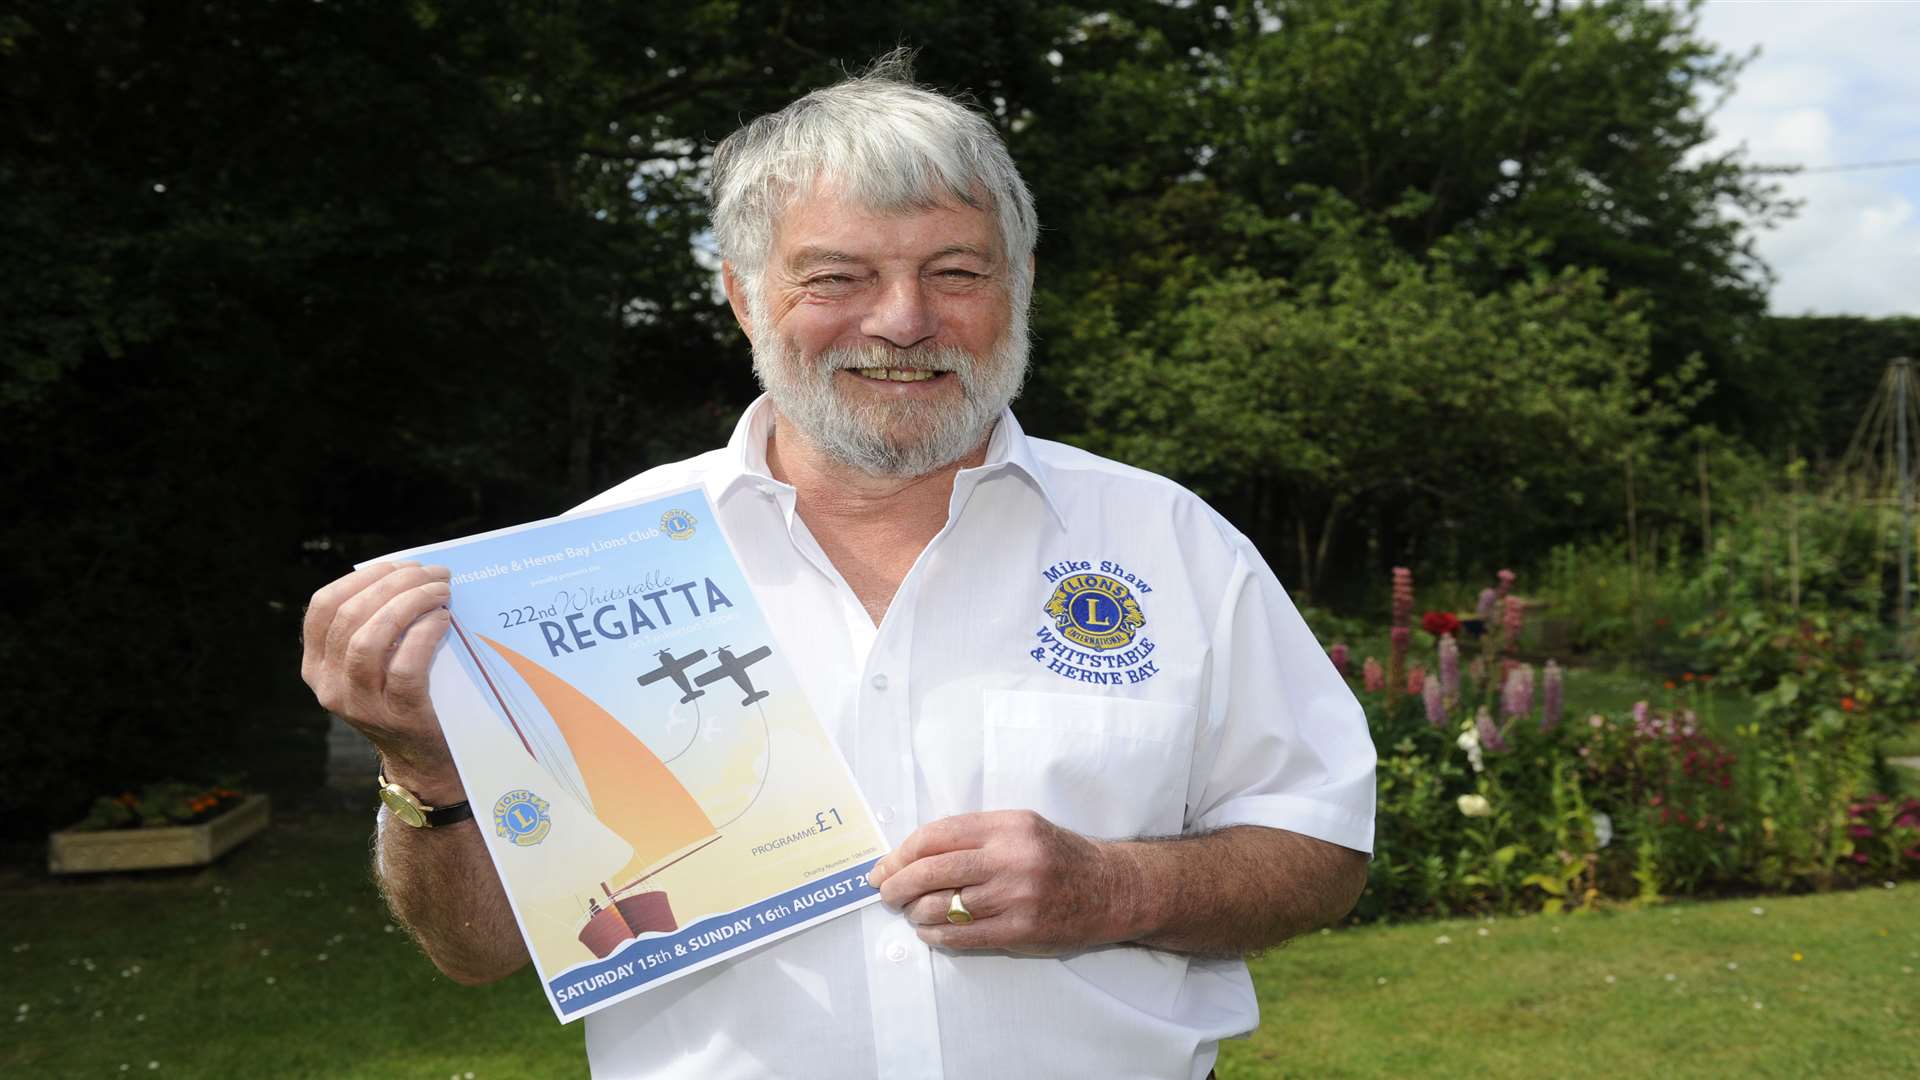 Regatta chairman Mike Shaw has welcomed the move